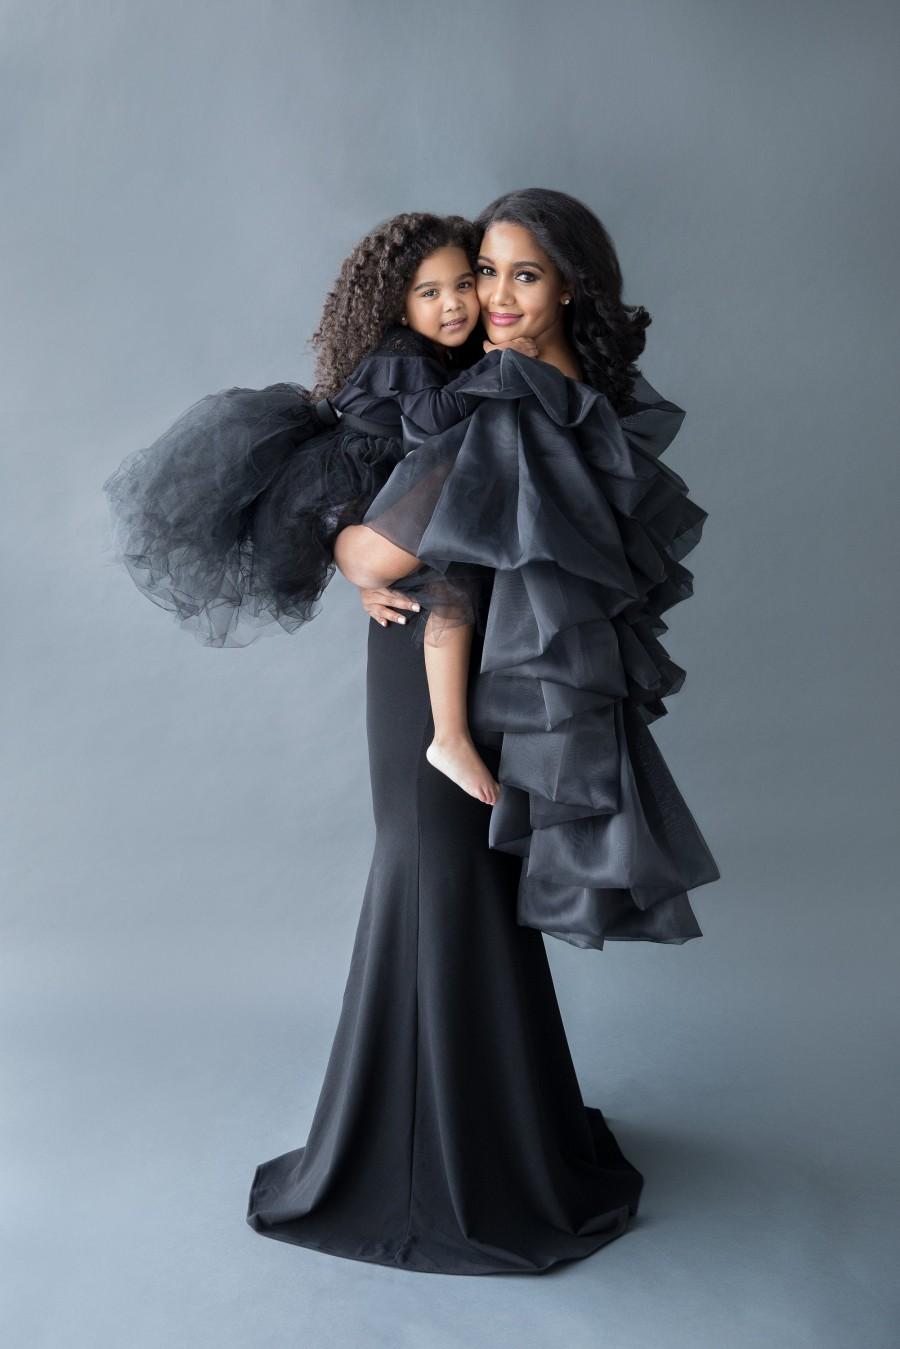 Wedding - Black Engagement Dress for Photo shoots and Photography Gown with ruffle cape dramatic dress mermaid style - The Patrician Cape Gown